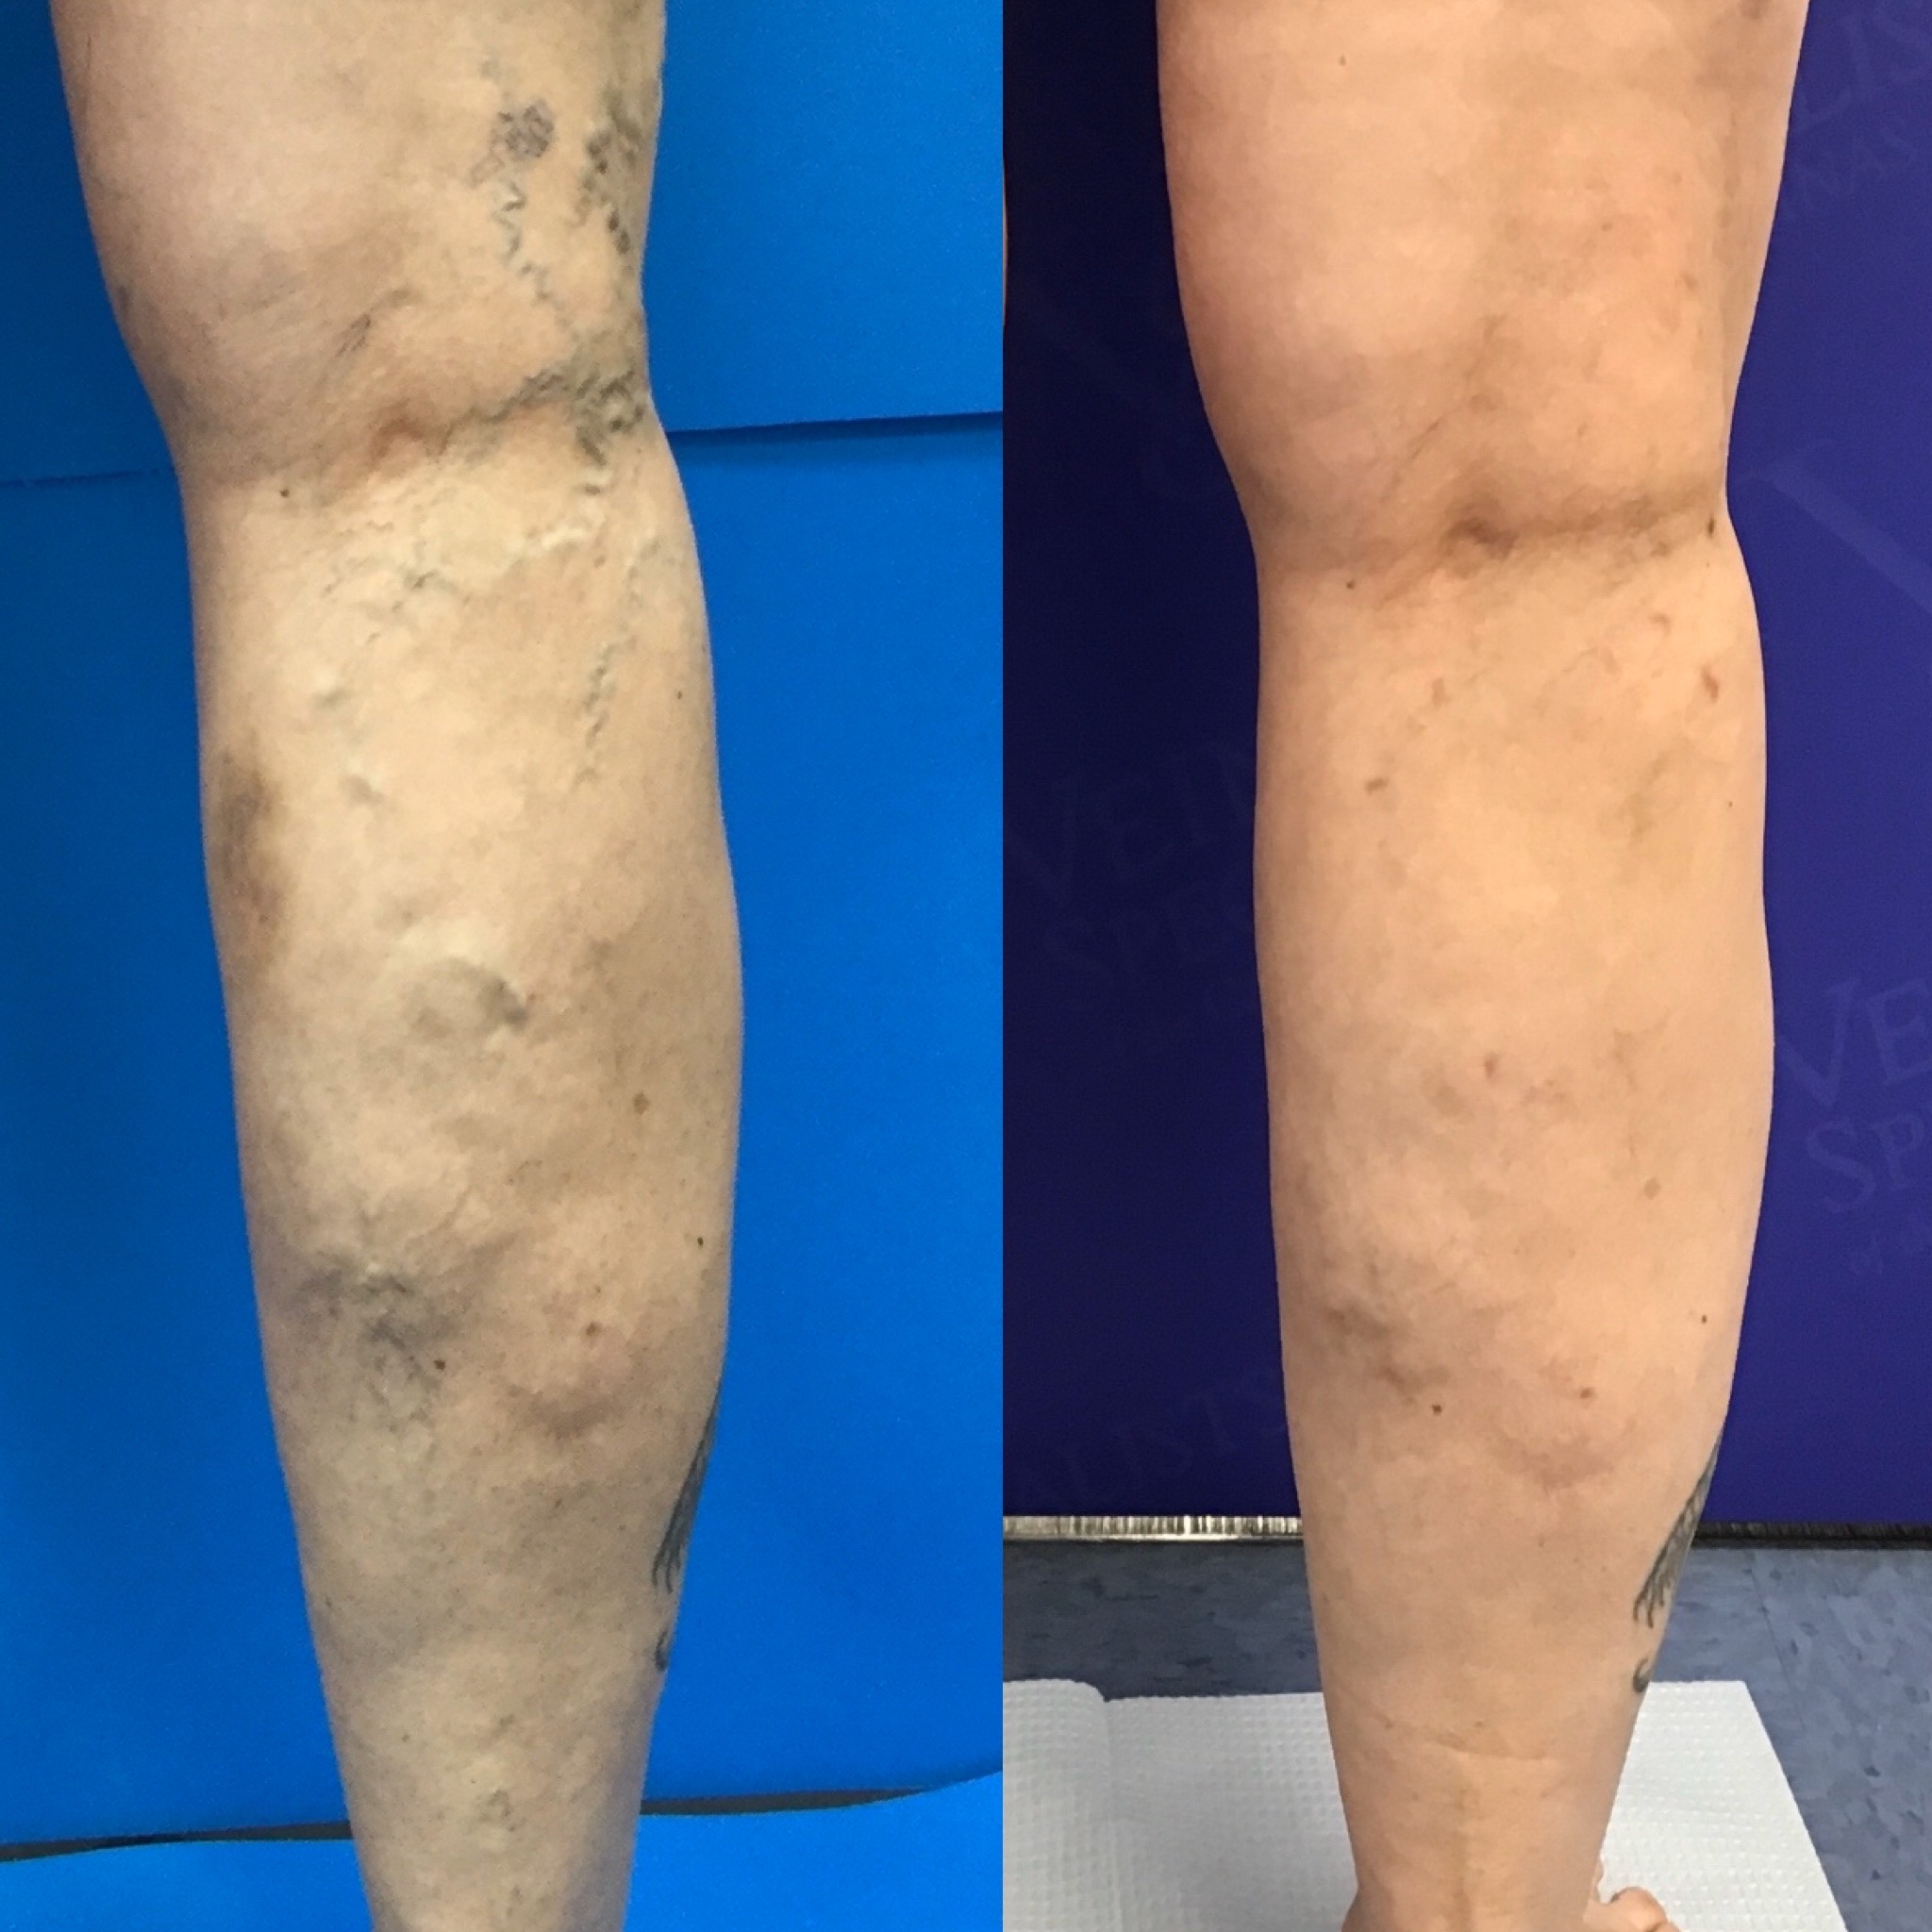 Spider Veins Are A Sign Of A Deeper Vascular Disease